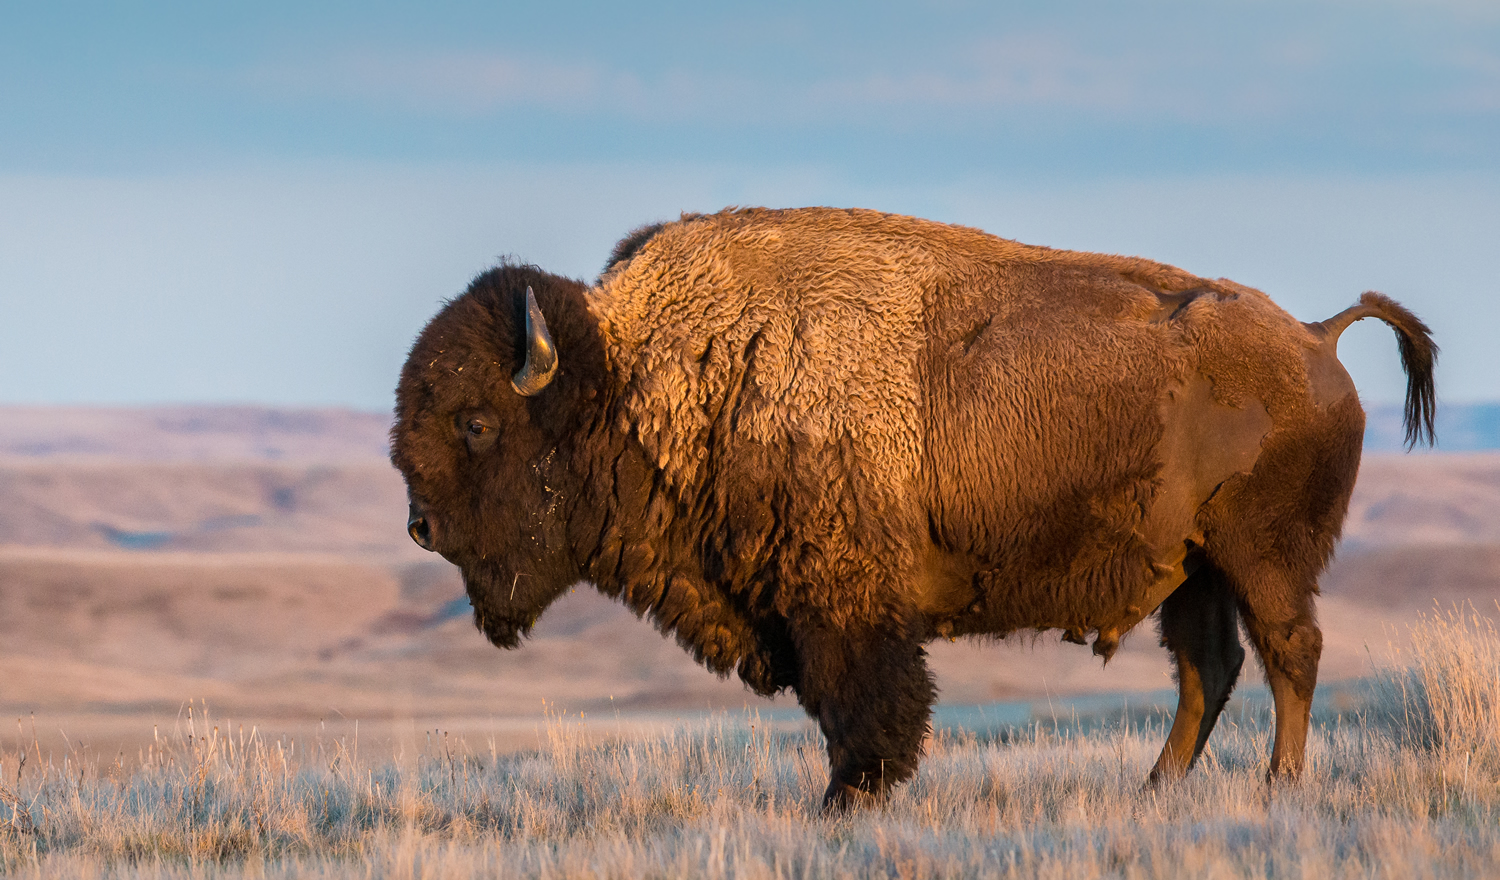 Are You a Master of General Knowledge? Take This True or False Quiz to Find Out bison